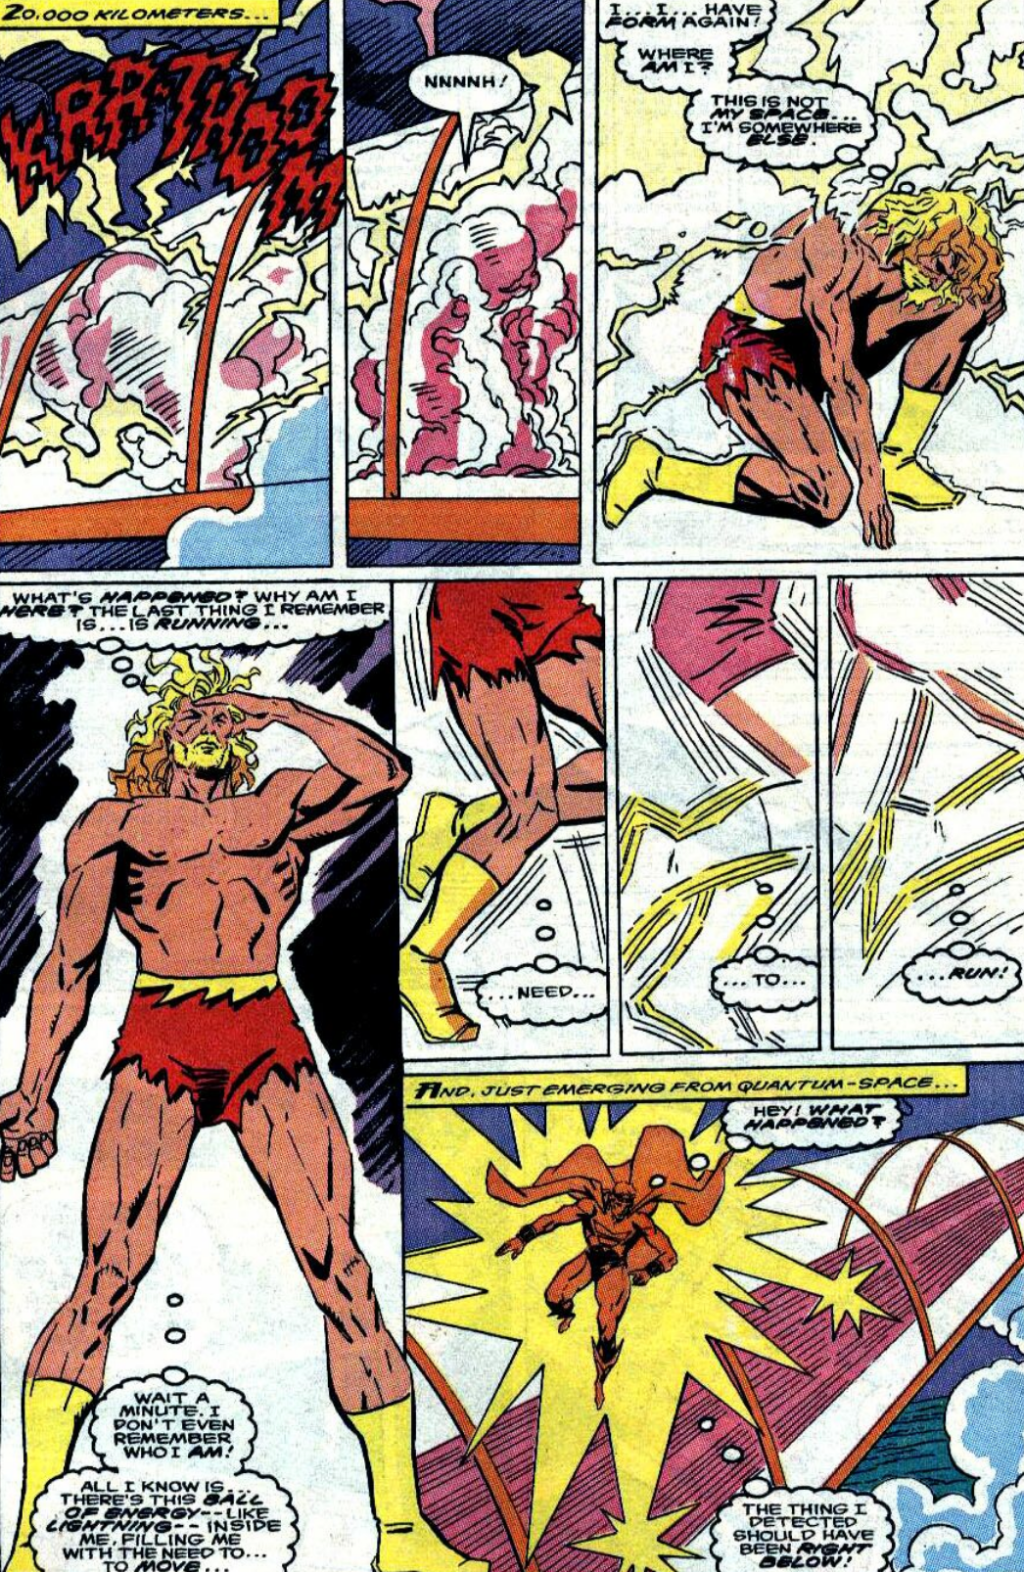 A strange, scarlet-clad speedster bolts into the 616 from across the multiverse in Quasar Vol. 1 #17 "Reborn to Run" (1990), Marvel Comics. Words by Mark Gruenwald, art by Mike Manley, Paul Becton, and Janice Chiang.